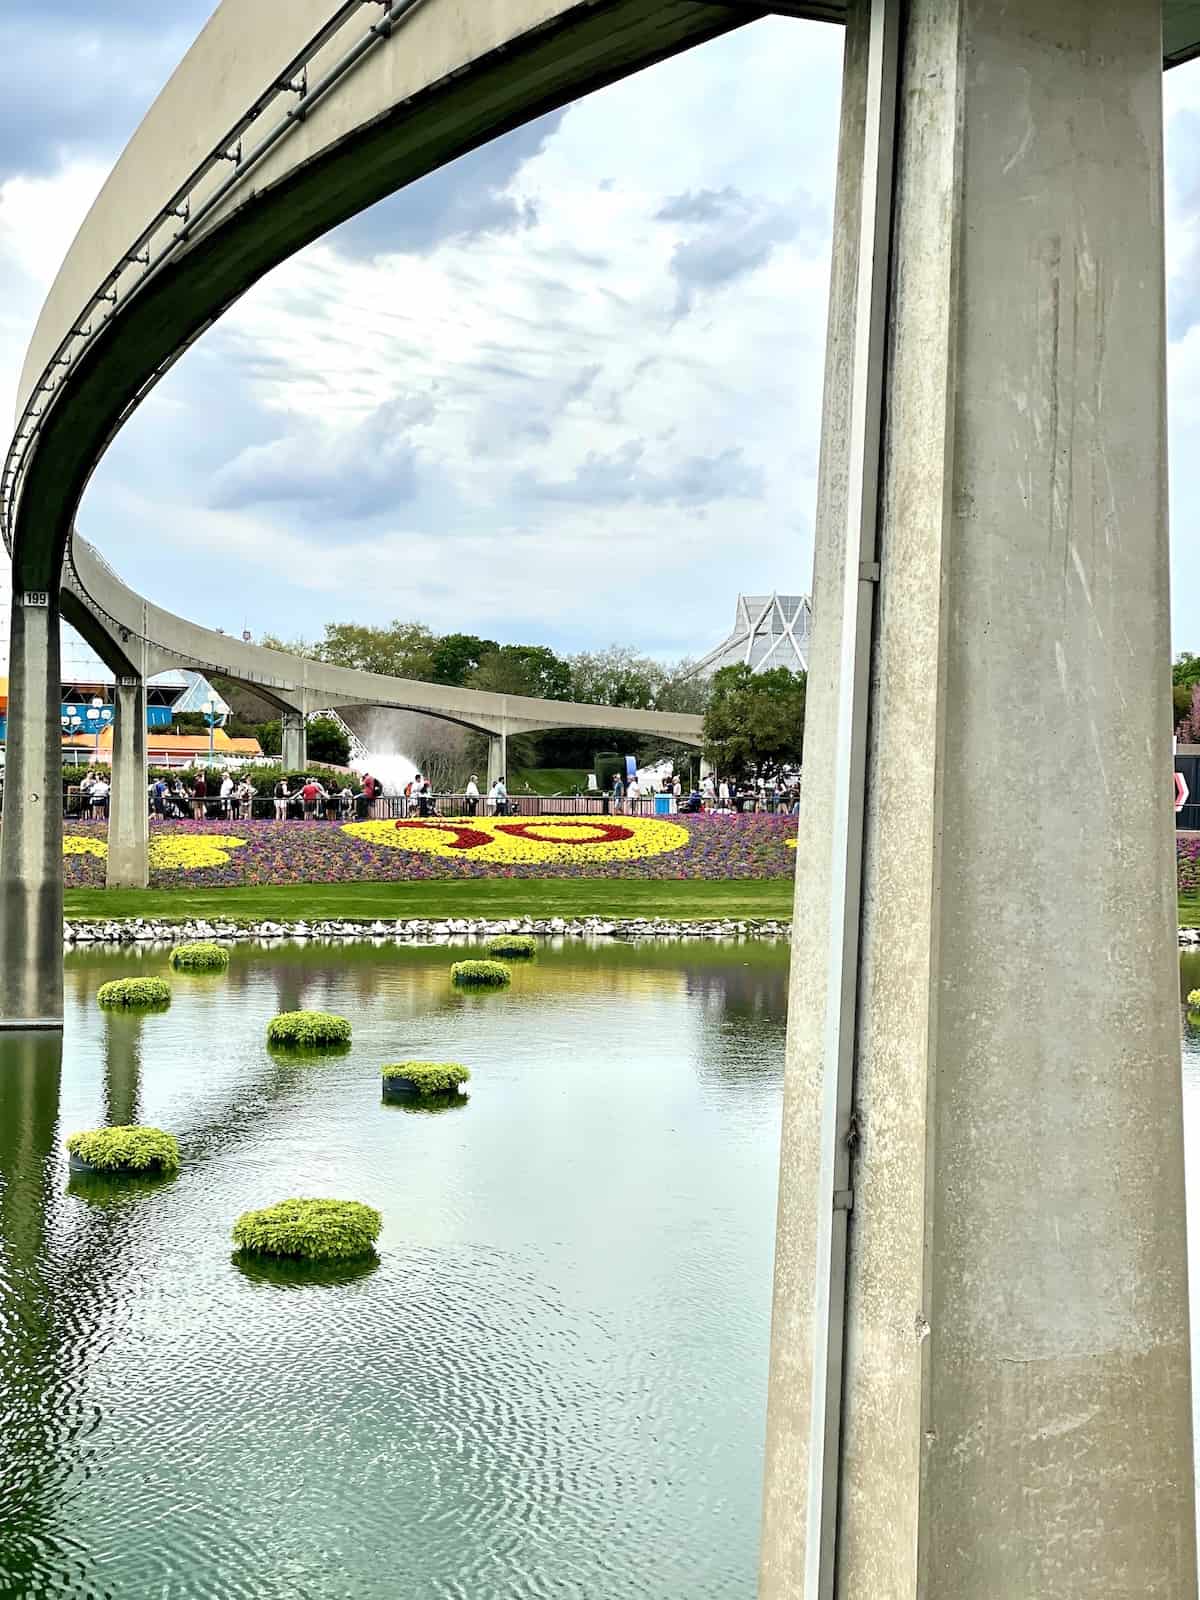 EPCOT Flower and Garden bridge and 50 Celebration Flowers.